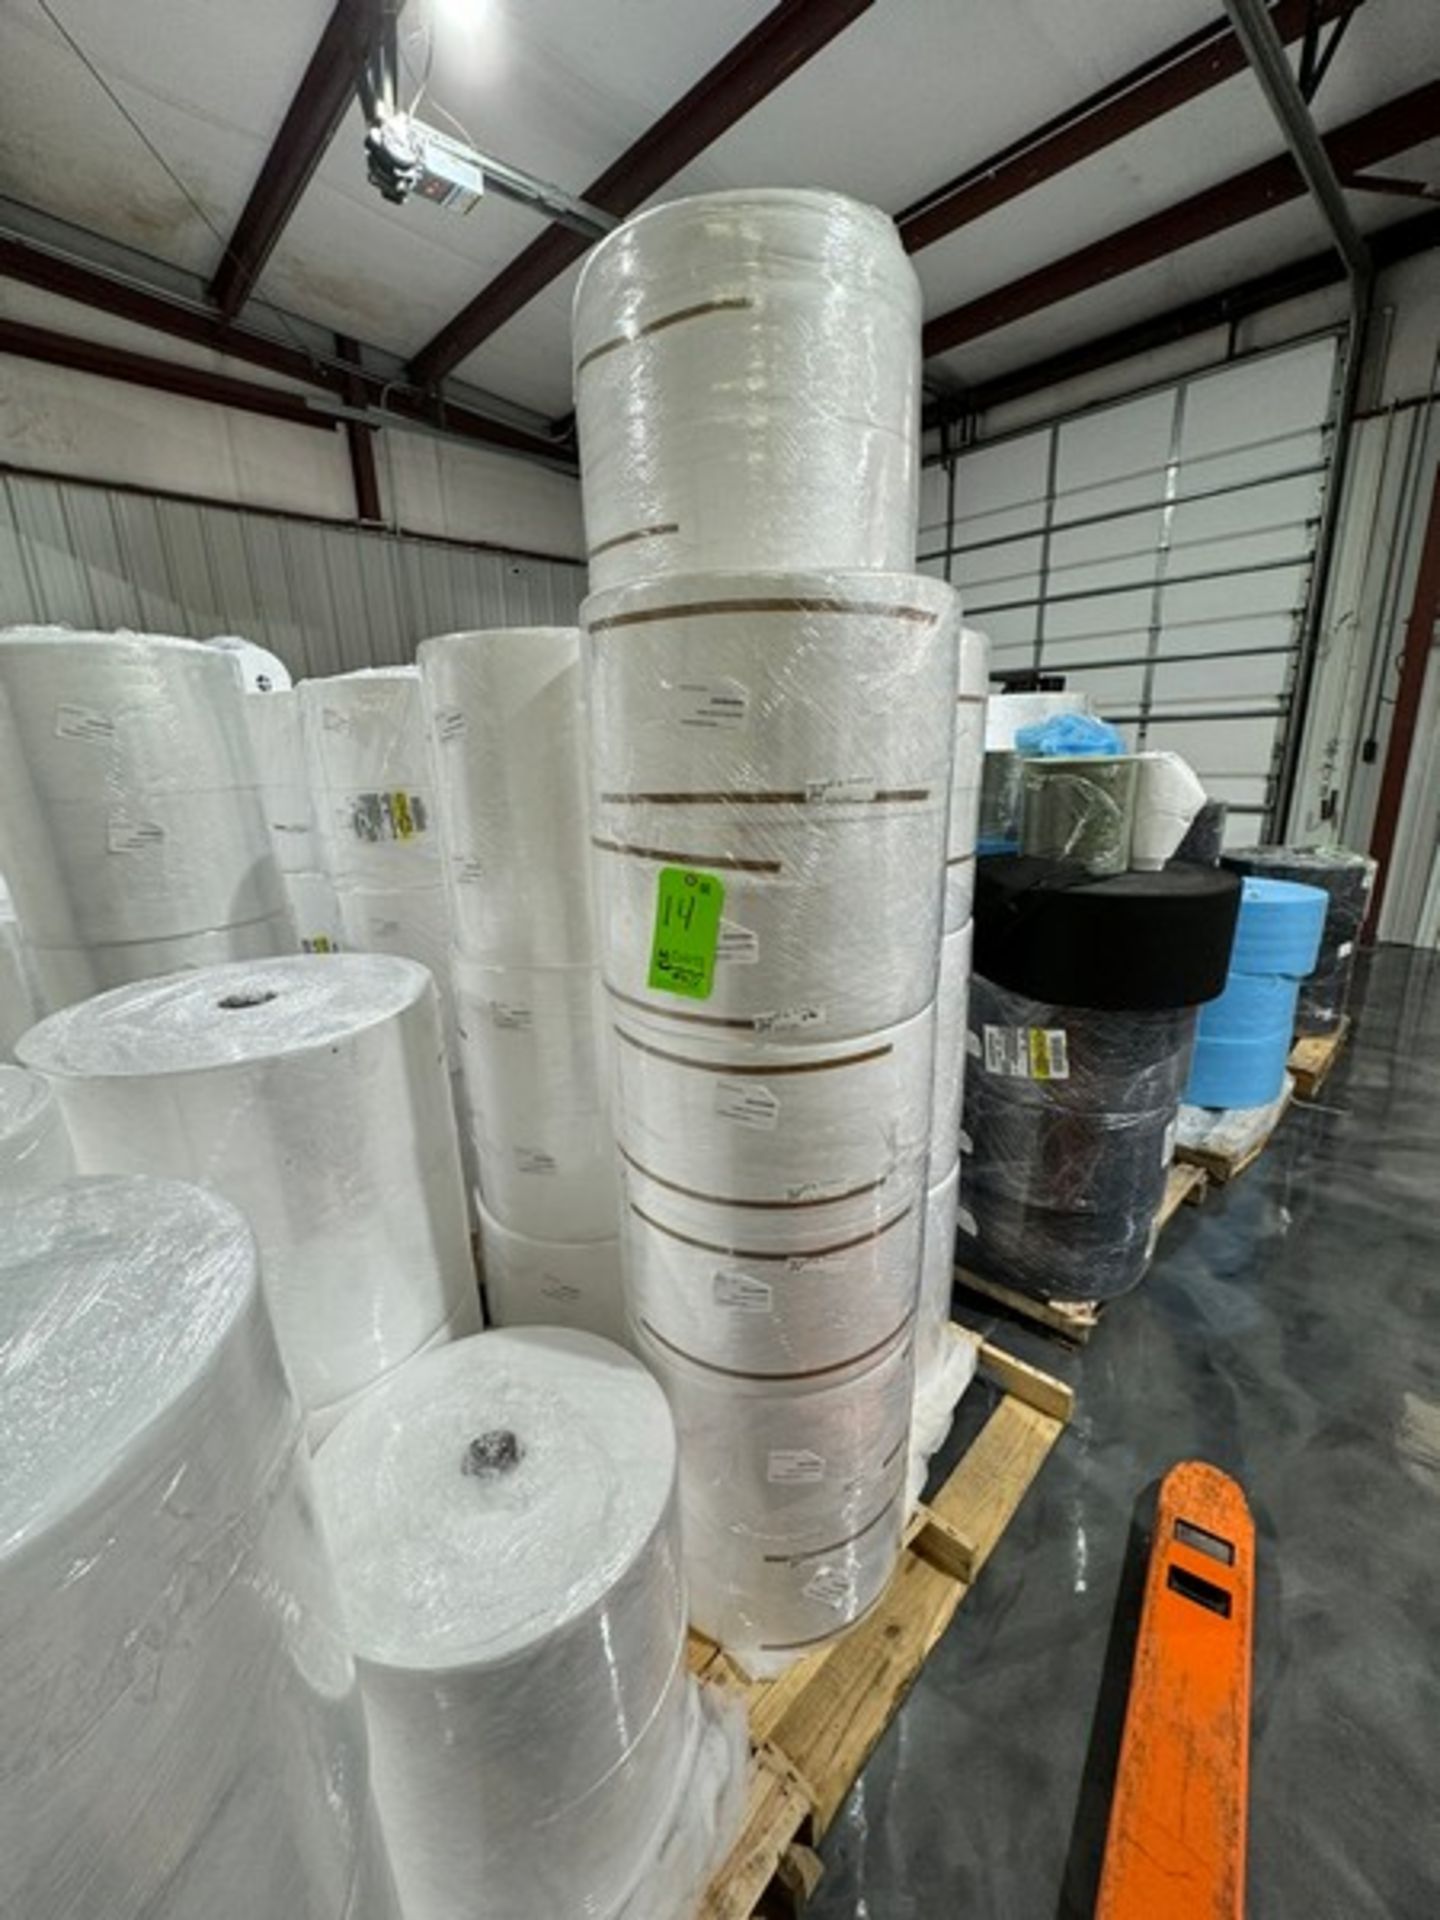 Lot of Assorted NEW Spun Bond and Monarch 100 Rolls, On 3-Pallets (LOCATED IN MOUNT HOME, AR) - Image 3 of 6